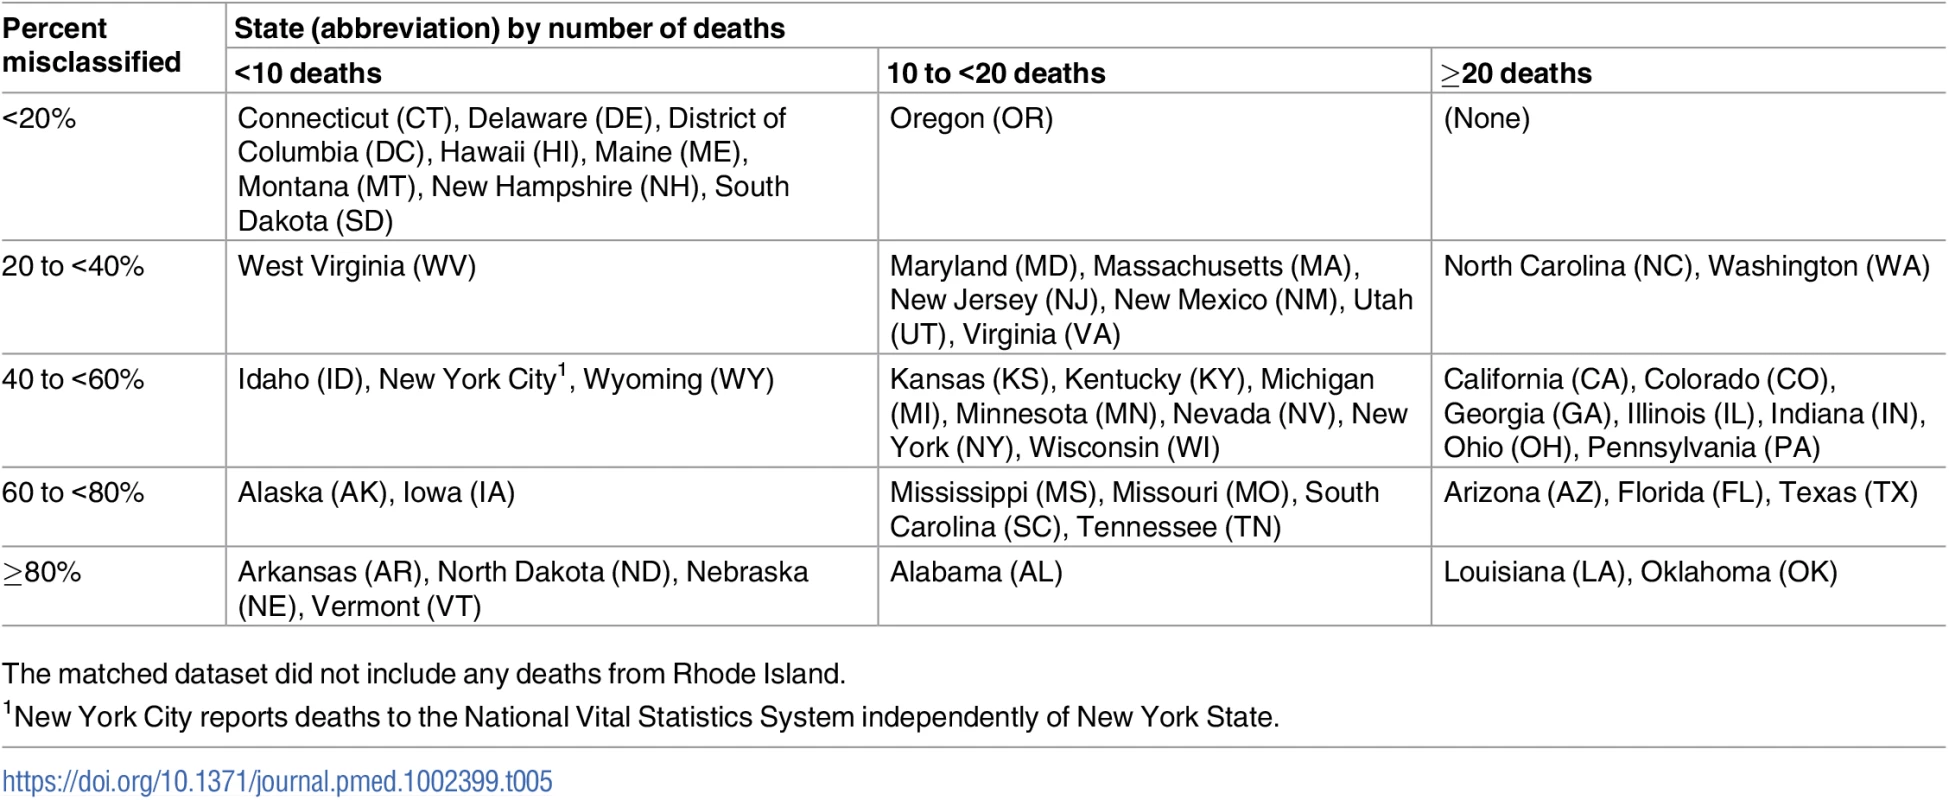 Misclassification rates for law-enforcement-related deaths in National Vital Statistics System mortality data based on cases matched to The Counted, 2015 (N = 991).